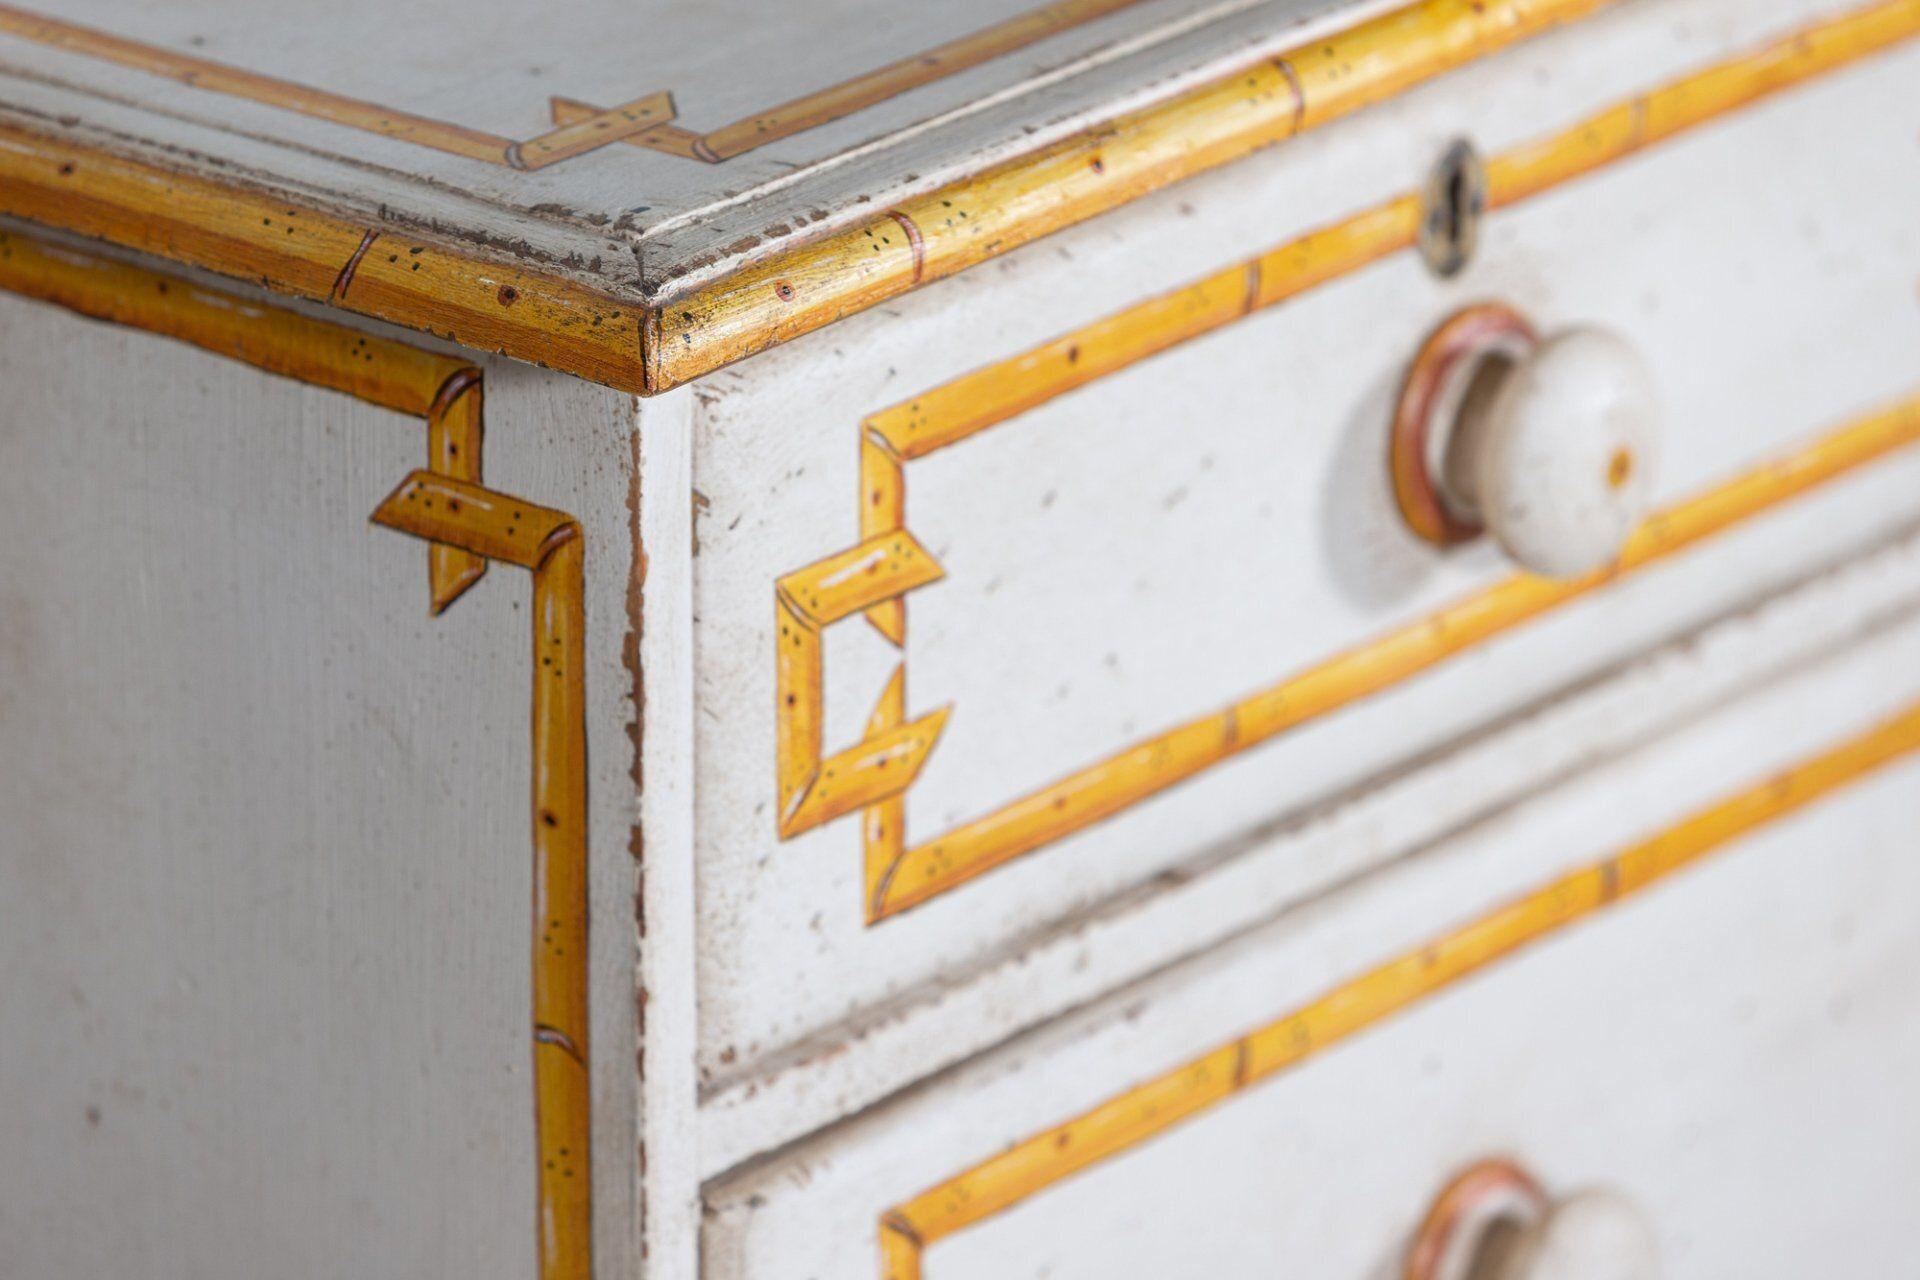 Circa 1890
19thC English Painted Faux Bamboo Chest of Drawers
Sku 1134
W108 x D55 x H81cm